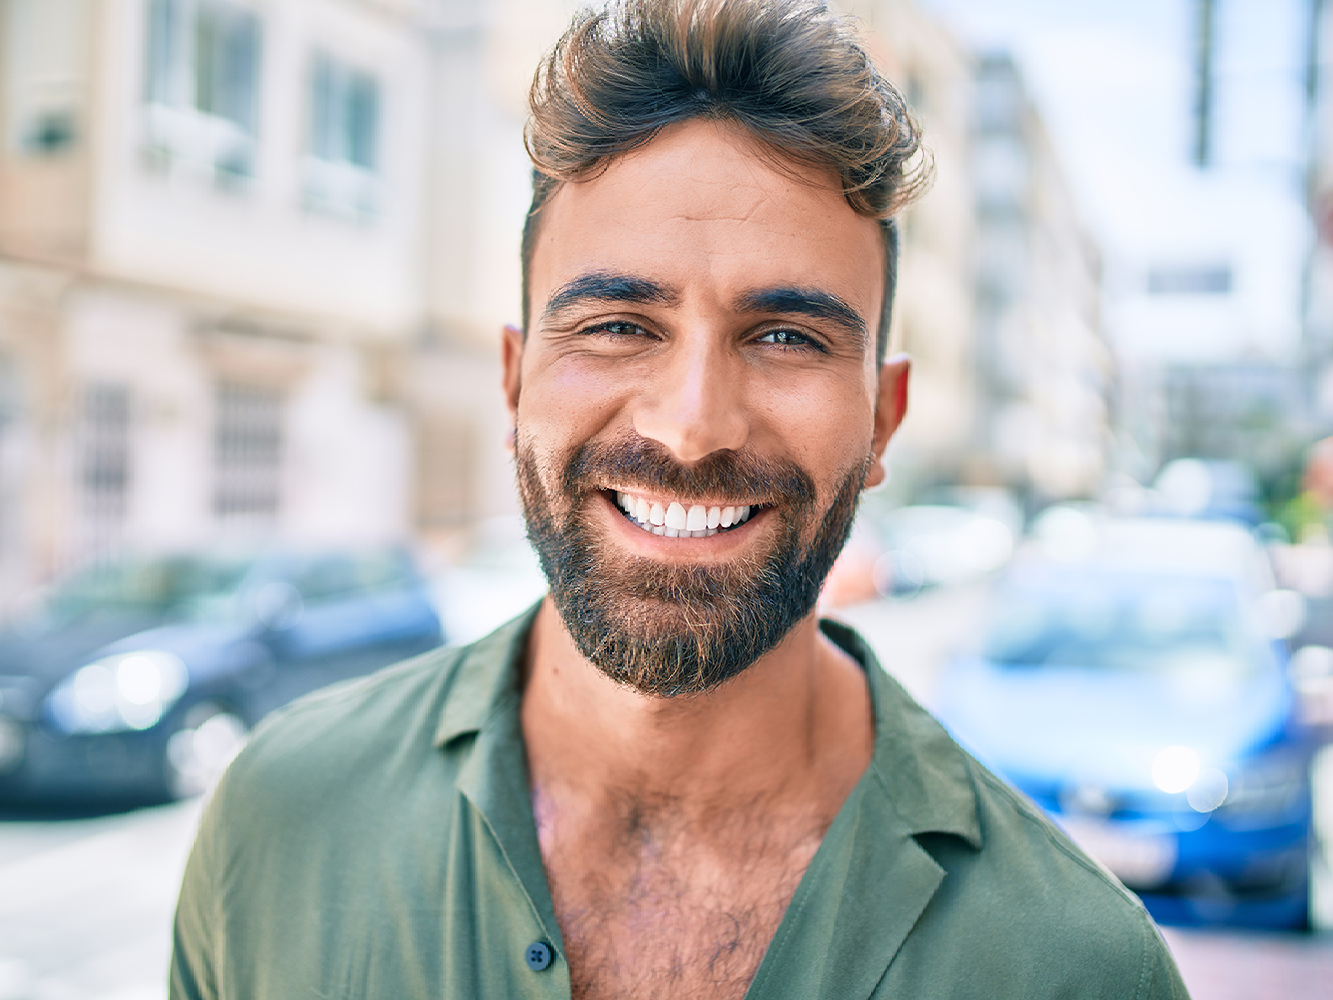 Guy smiling outside teeth showing in front of building